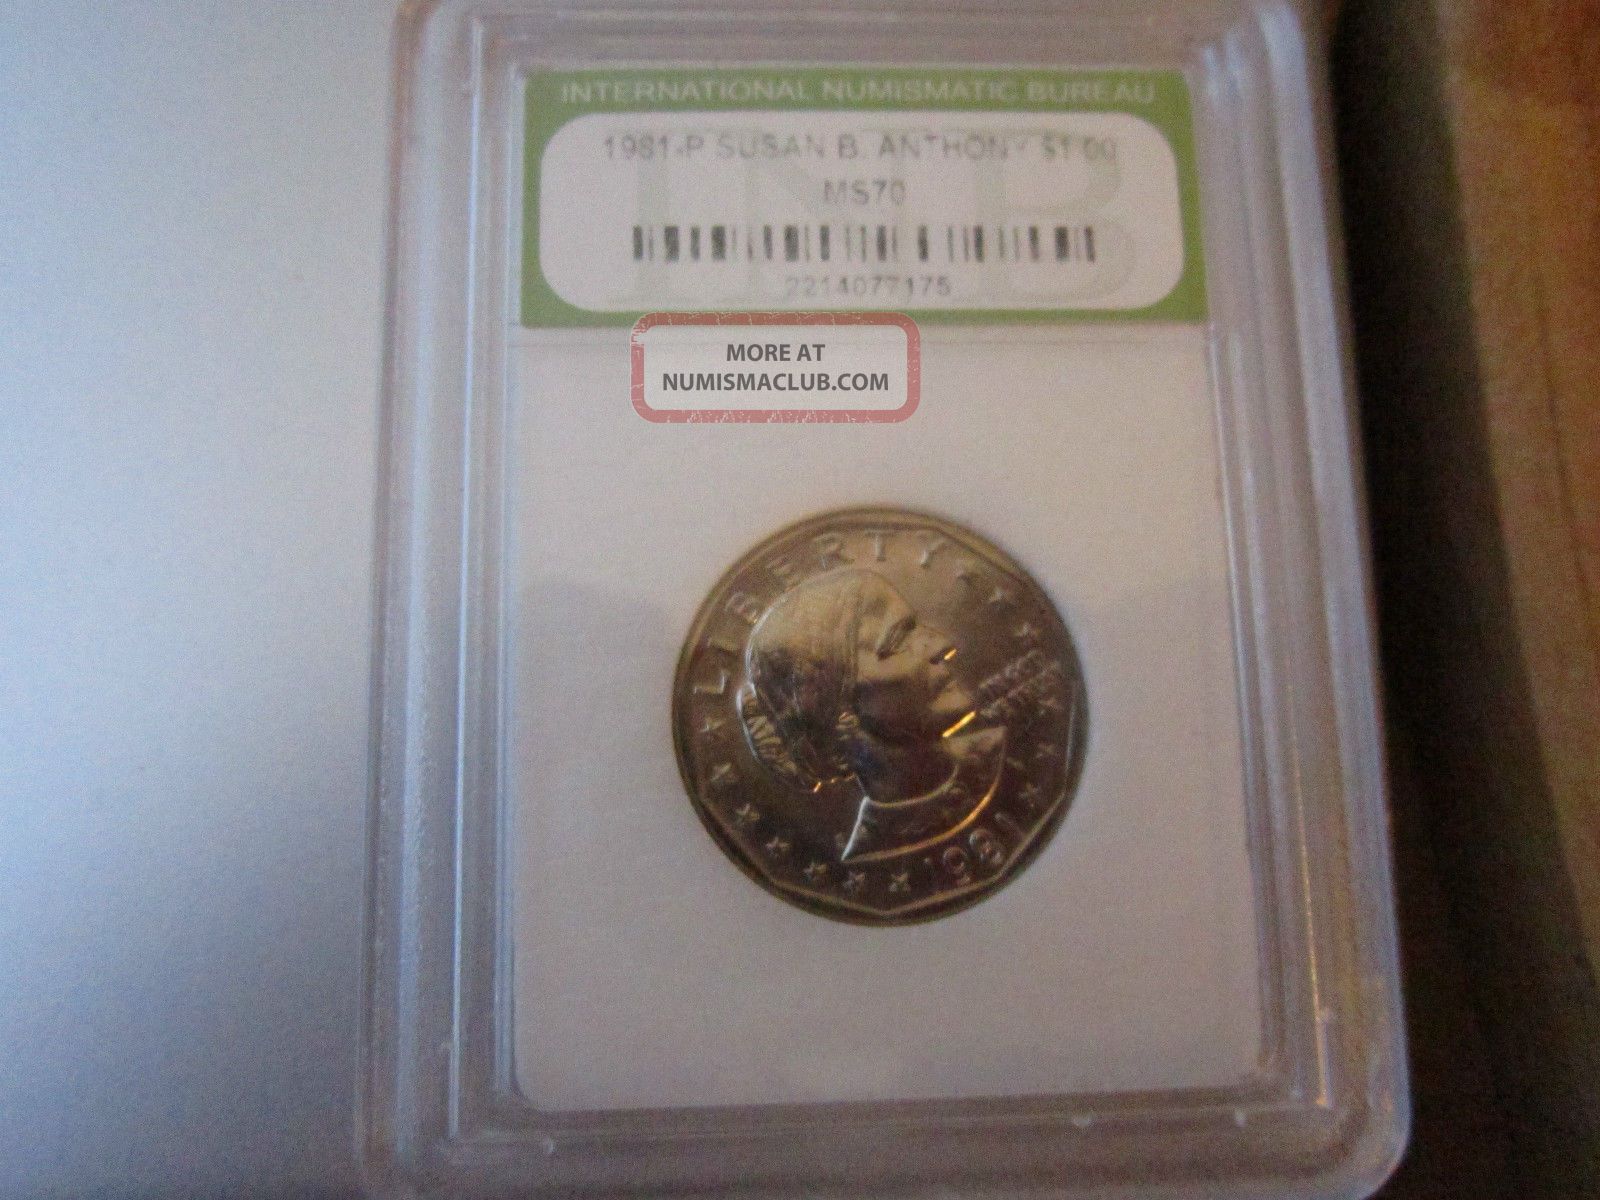 1981 susan b anthony dollar coin value